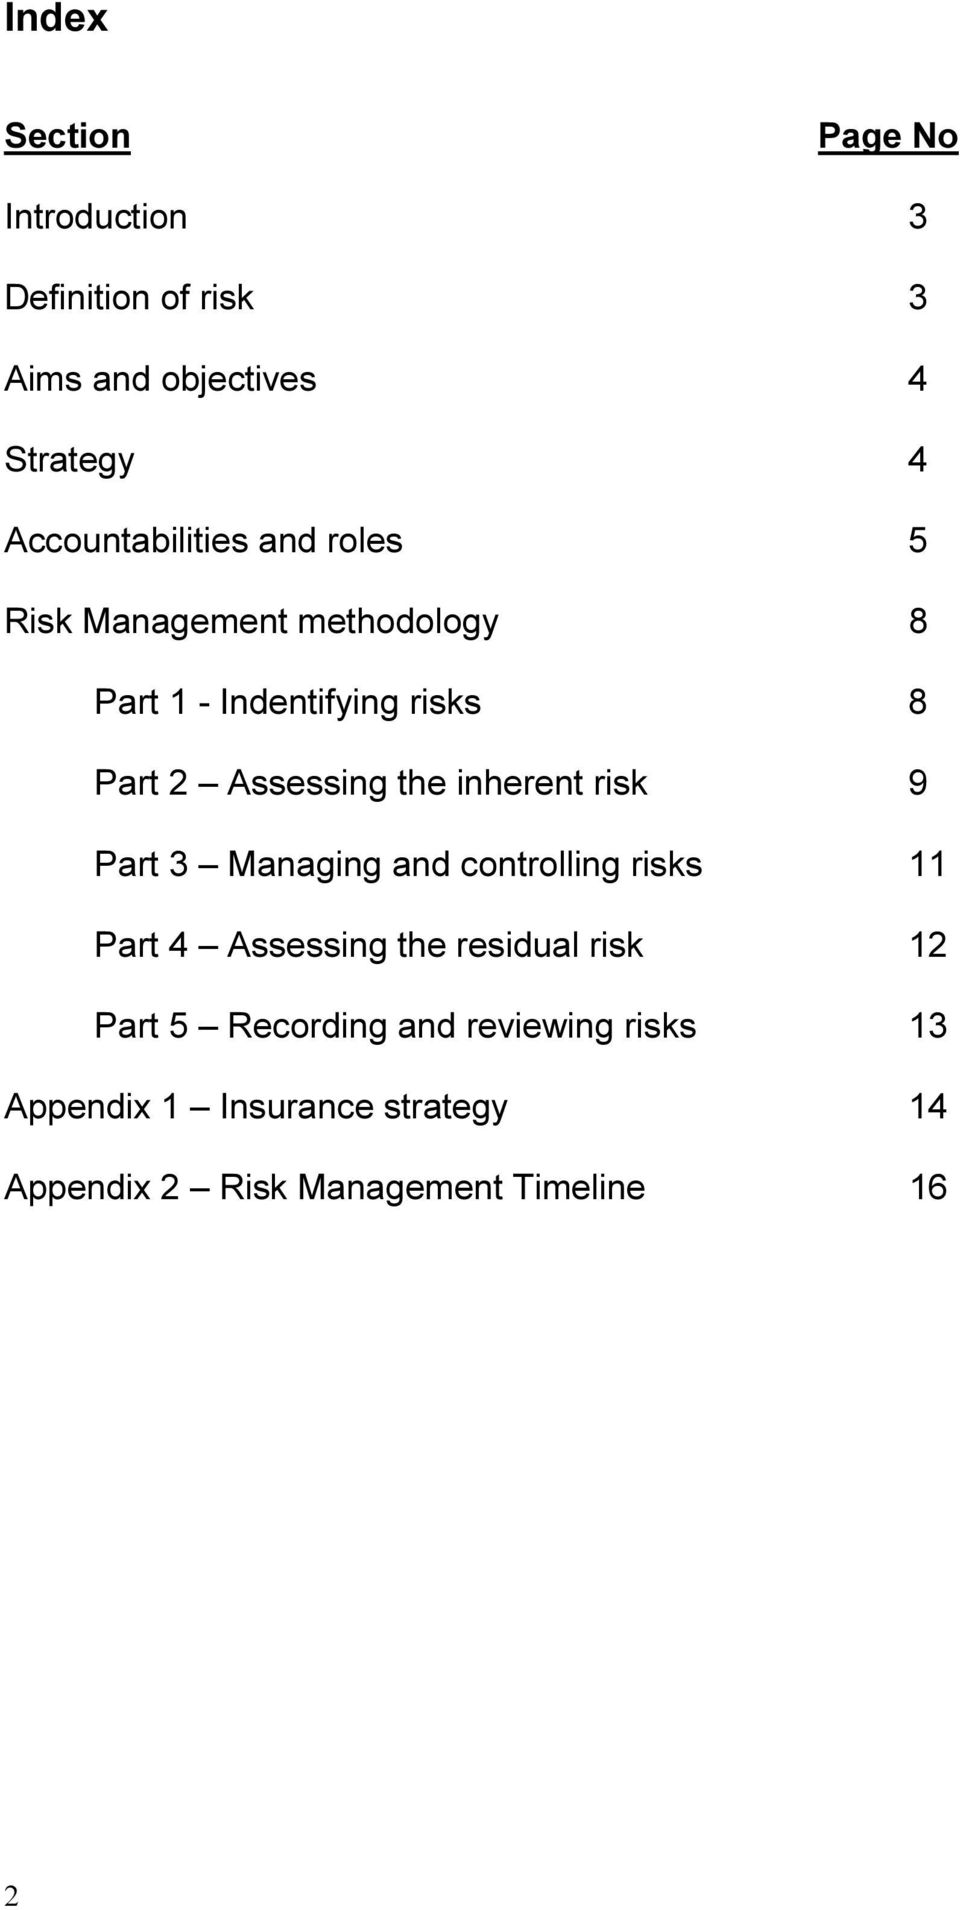 Assessing the inherent risk 9 Part 3 Managing and controlling risks 11 Part 4 Assessing the residual